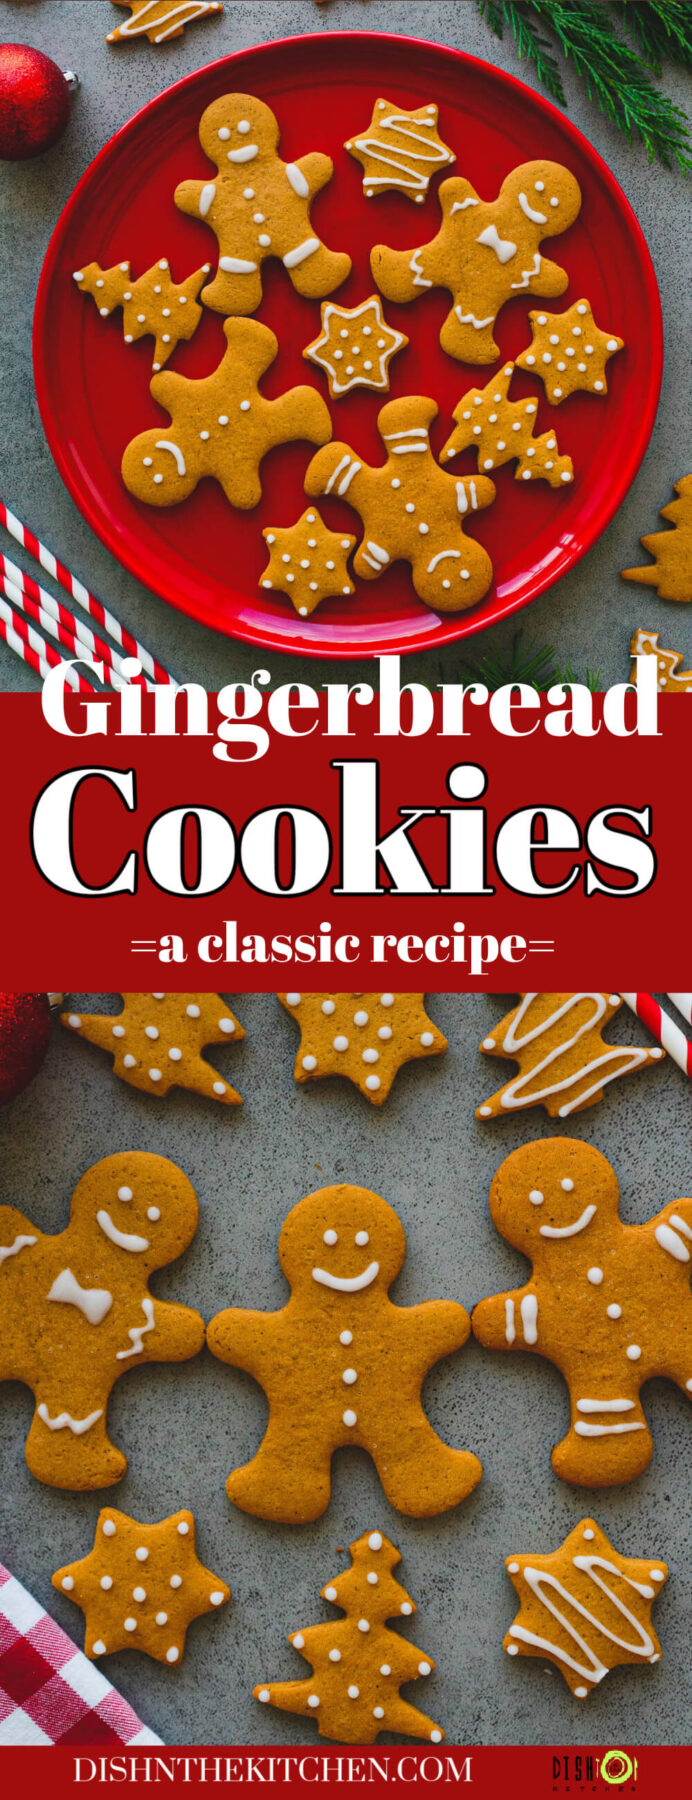 Pinterest image featuring easy gingerbread cookies decorated with simple white icing.